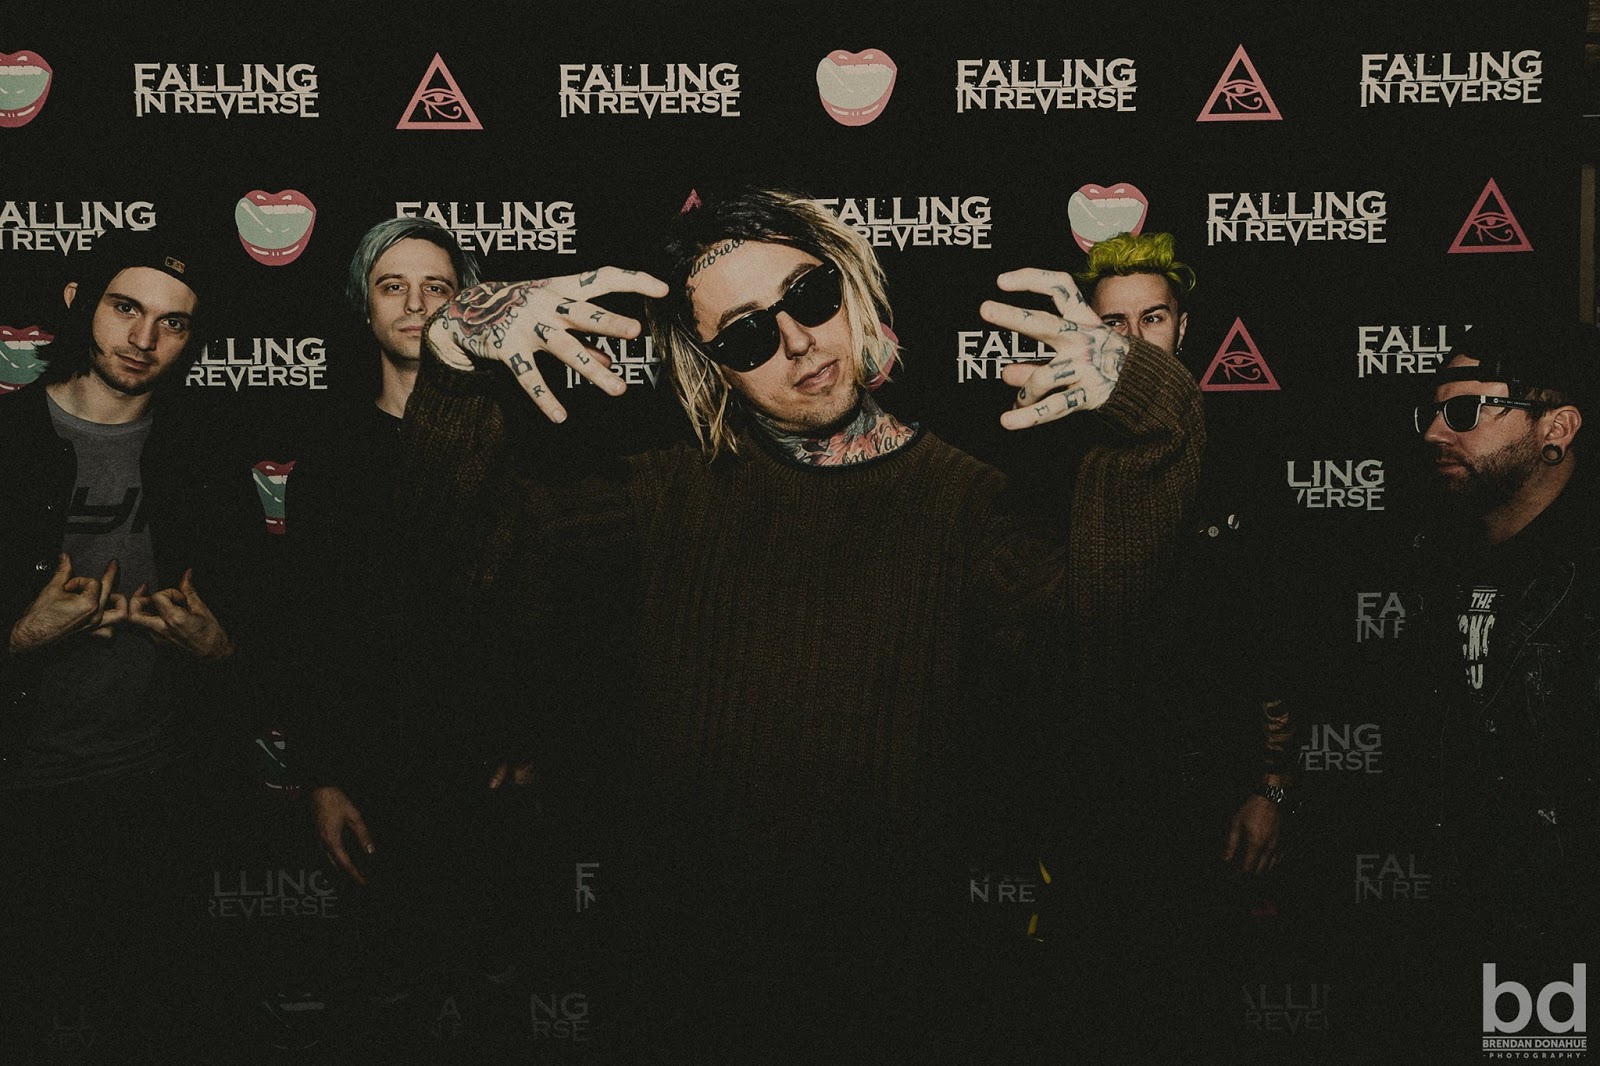 Группа falling. Группа Falling in Reverse. Falling in Reverse 2013. Falling in Reverse Fashionably late. Falling in Reverse плакат.